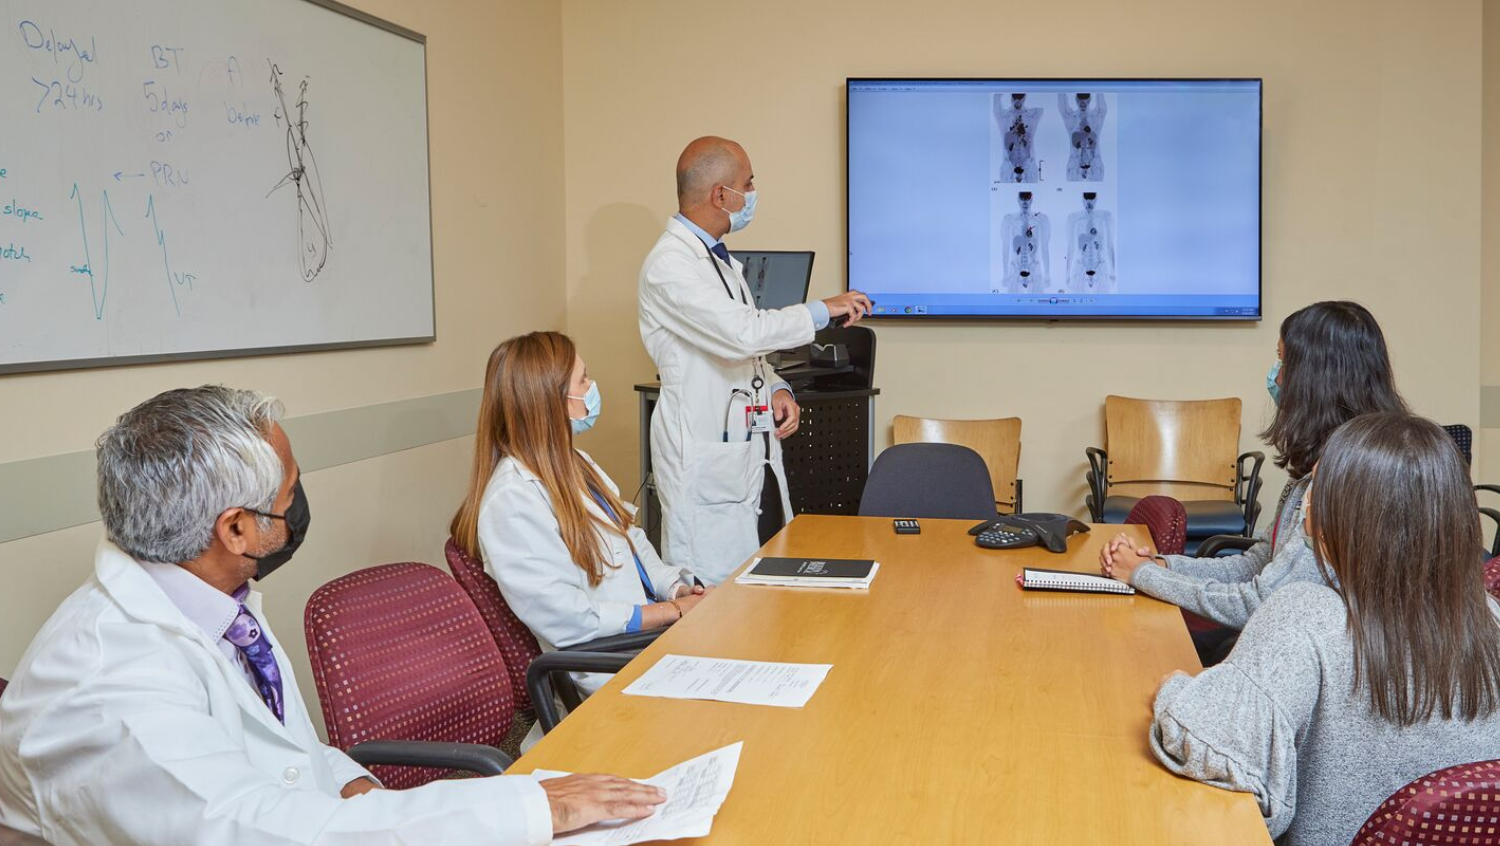 A group of people in white coats wearing masks are seated around a wooden conference table. A tall bald doctor is standing at the front of the room, clearly presenting patient scans. He and everyone at the table are masked.